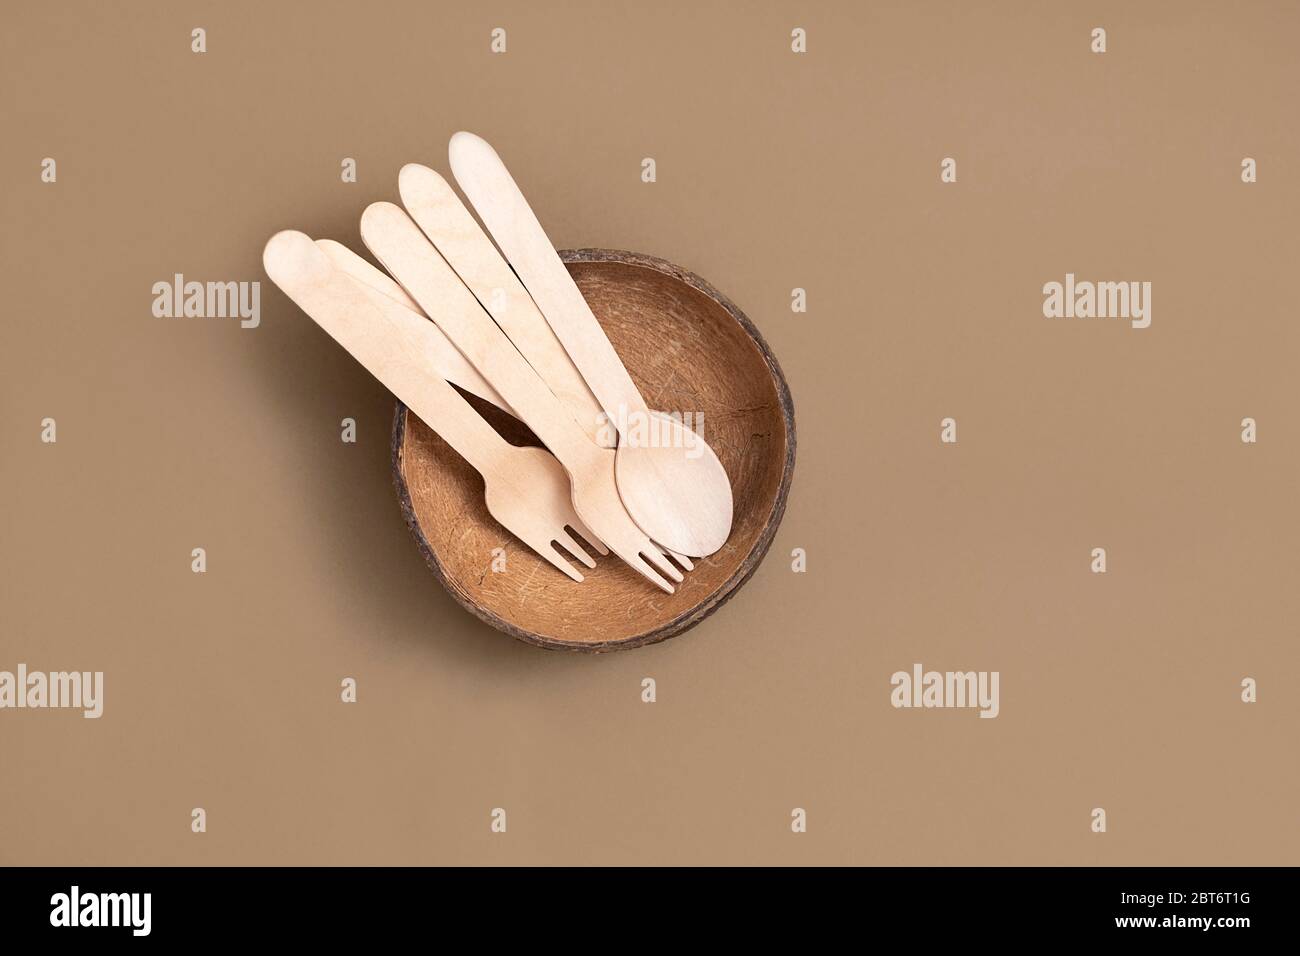 Biodegradable cutlery (spoon, forks, coconut bowl) on neutral brown background. Top view with copy space Stock Photo